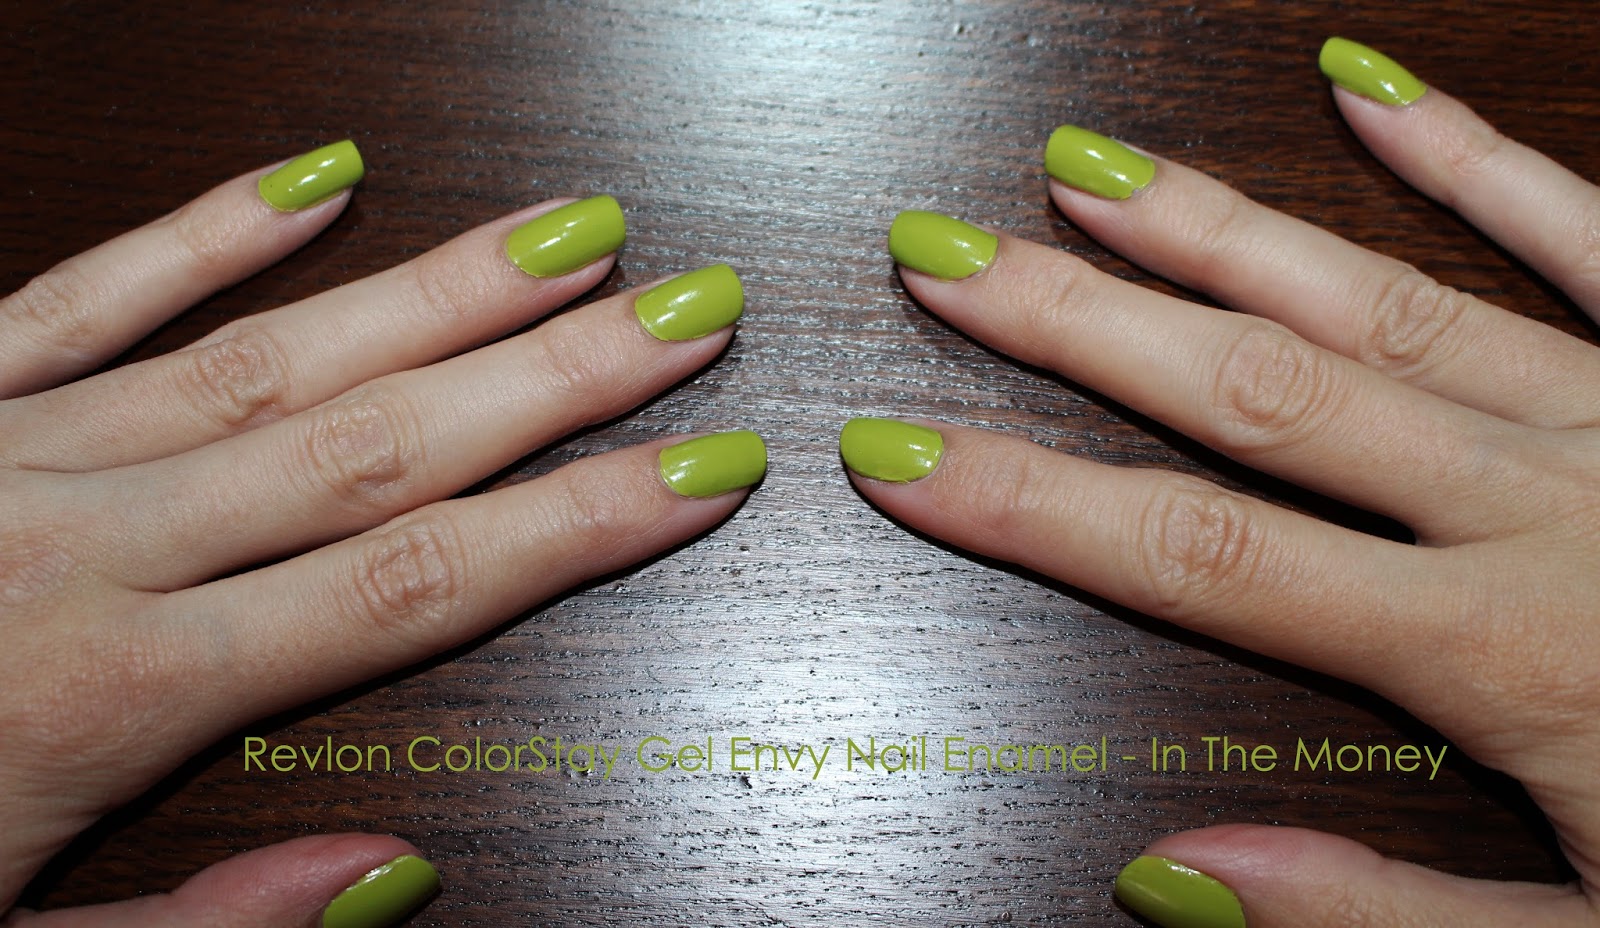 6. Revlon ColorStay Gel Envy Nail Polish in "Feet to the Fire" - wide 9